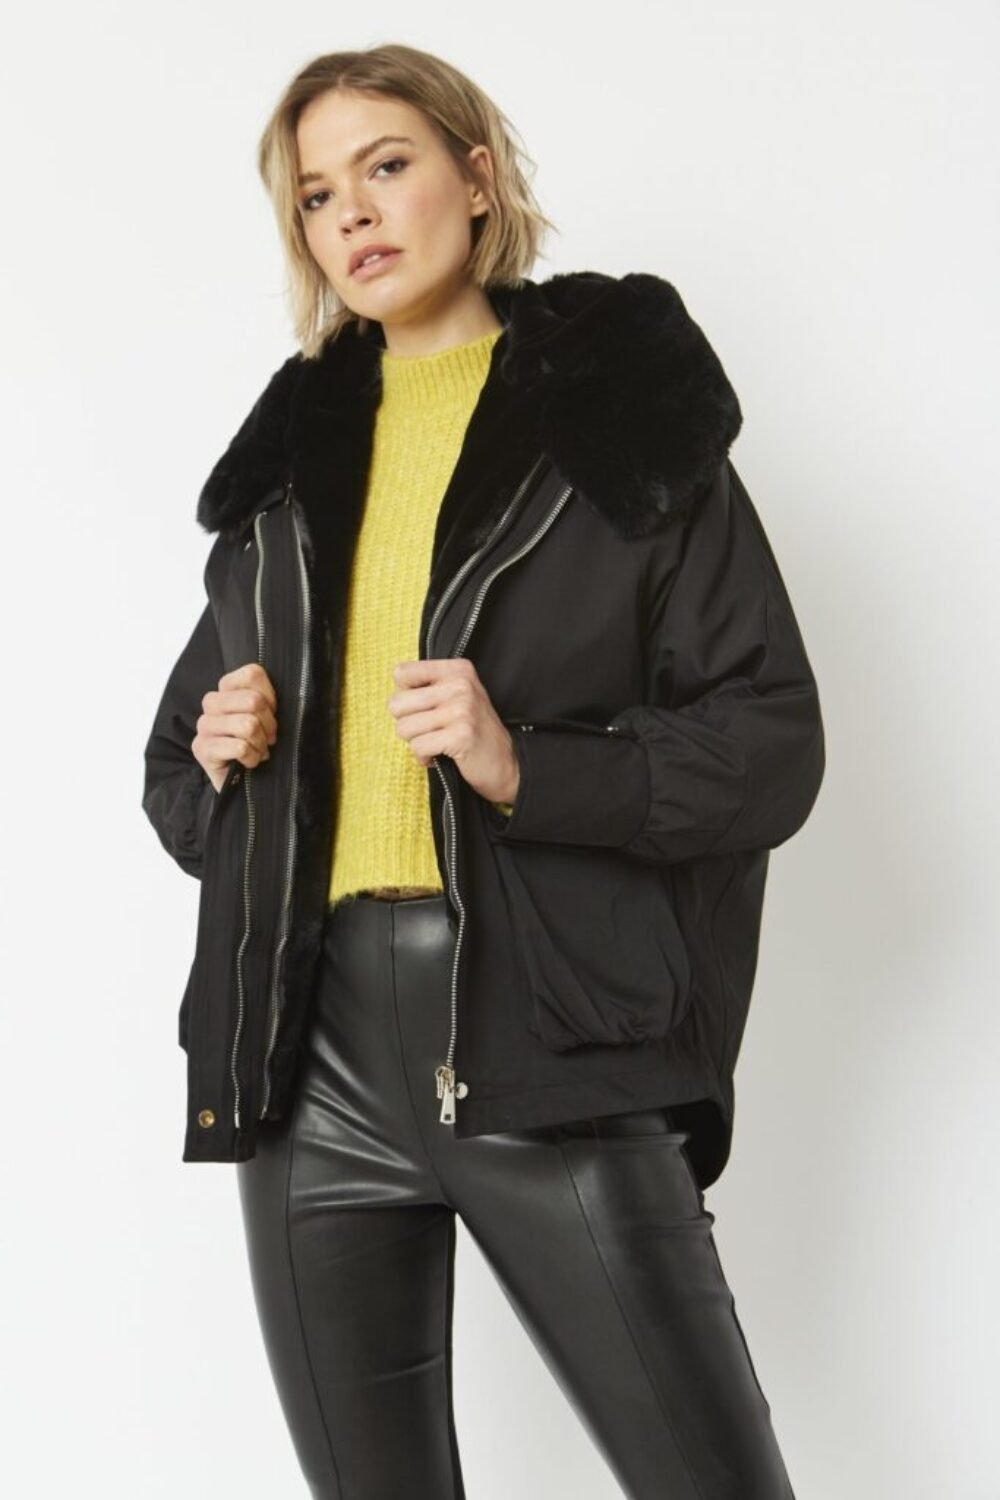 Shop Lux Black Three in One Faux Fur Parka Coat and women's luxury and designer clothes at www.lux-apparel.co.uk